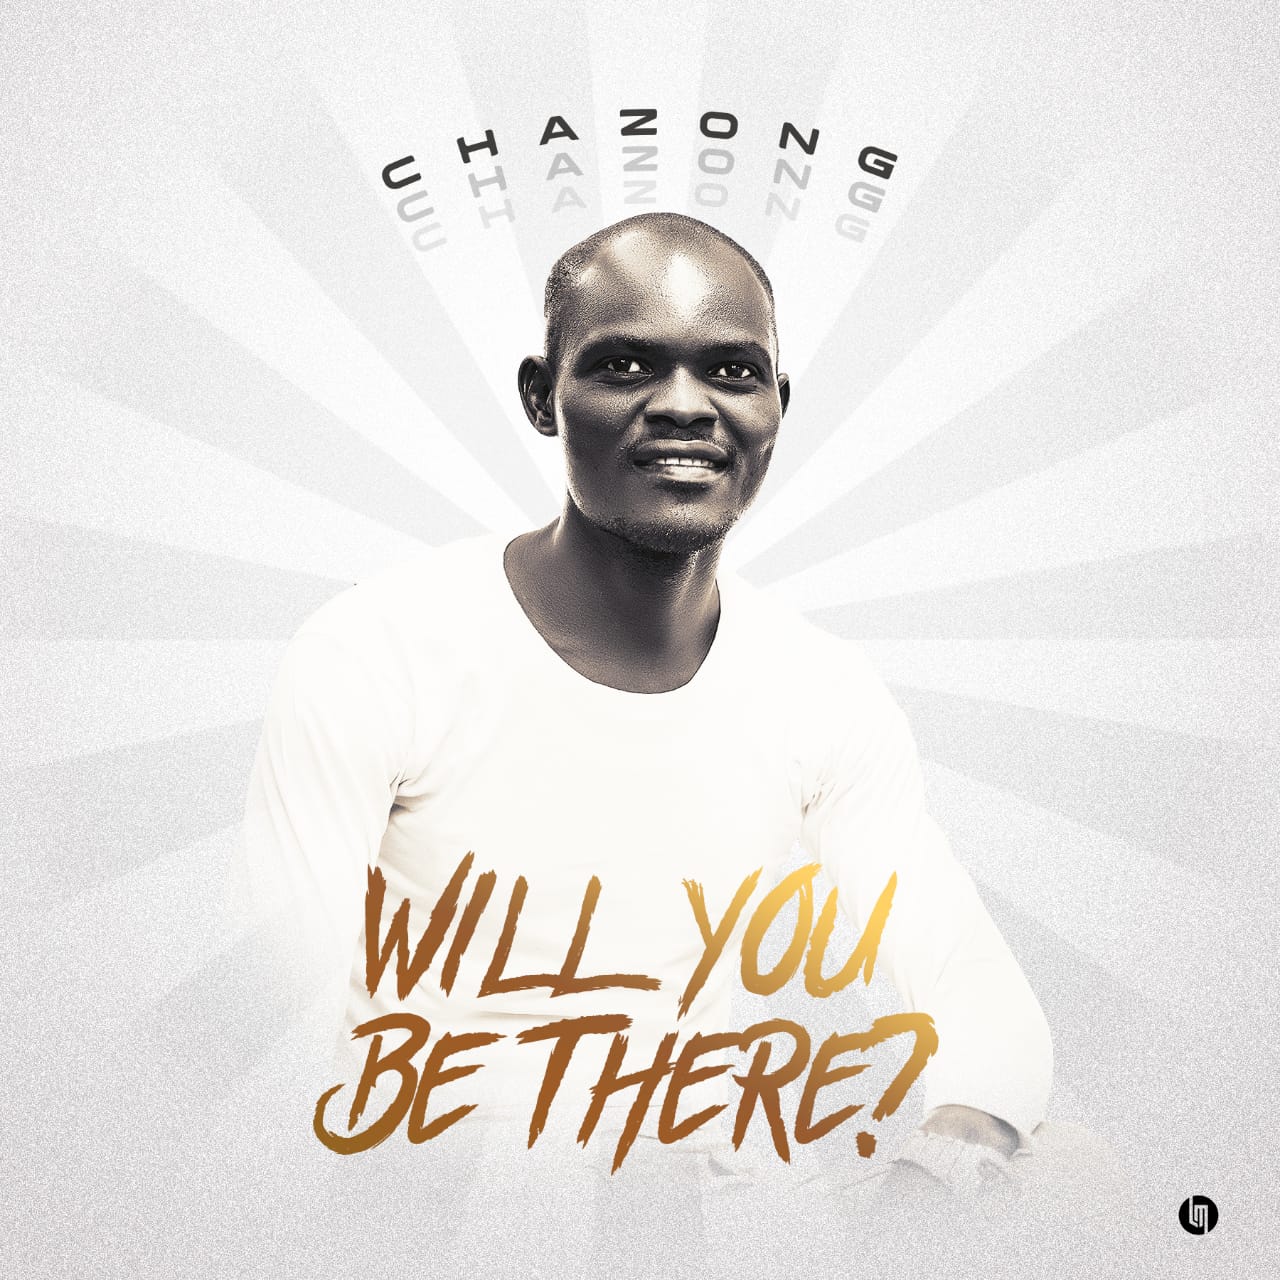 Chazong - Will You Be There?